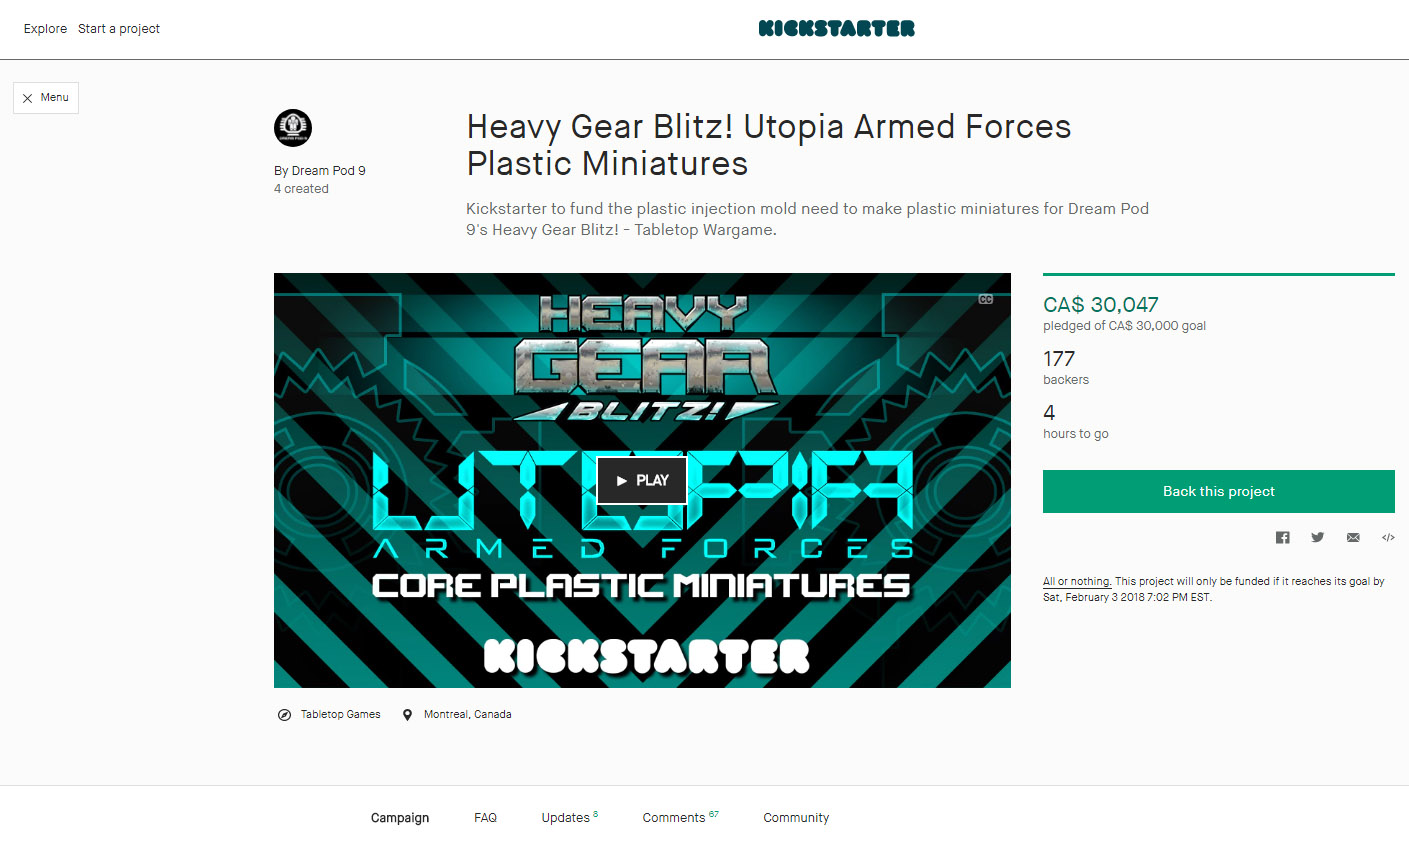 Heavy Gear Blitz Utopia Armed Forces Plastic Miniatures Kickstarter has just cleared its Initial Funding Goal, with 4 hours left to Go!